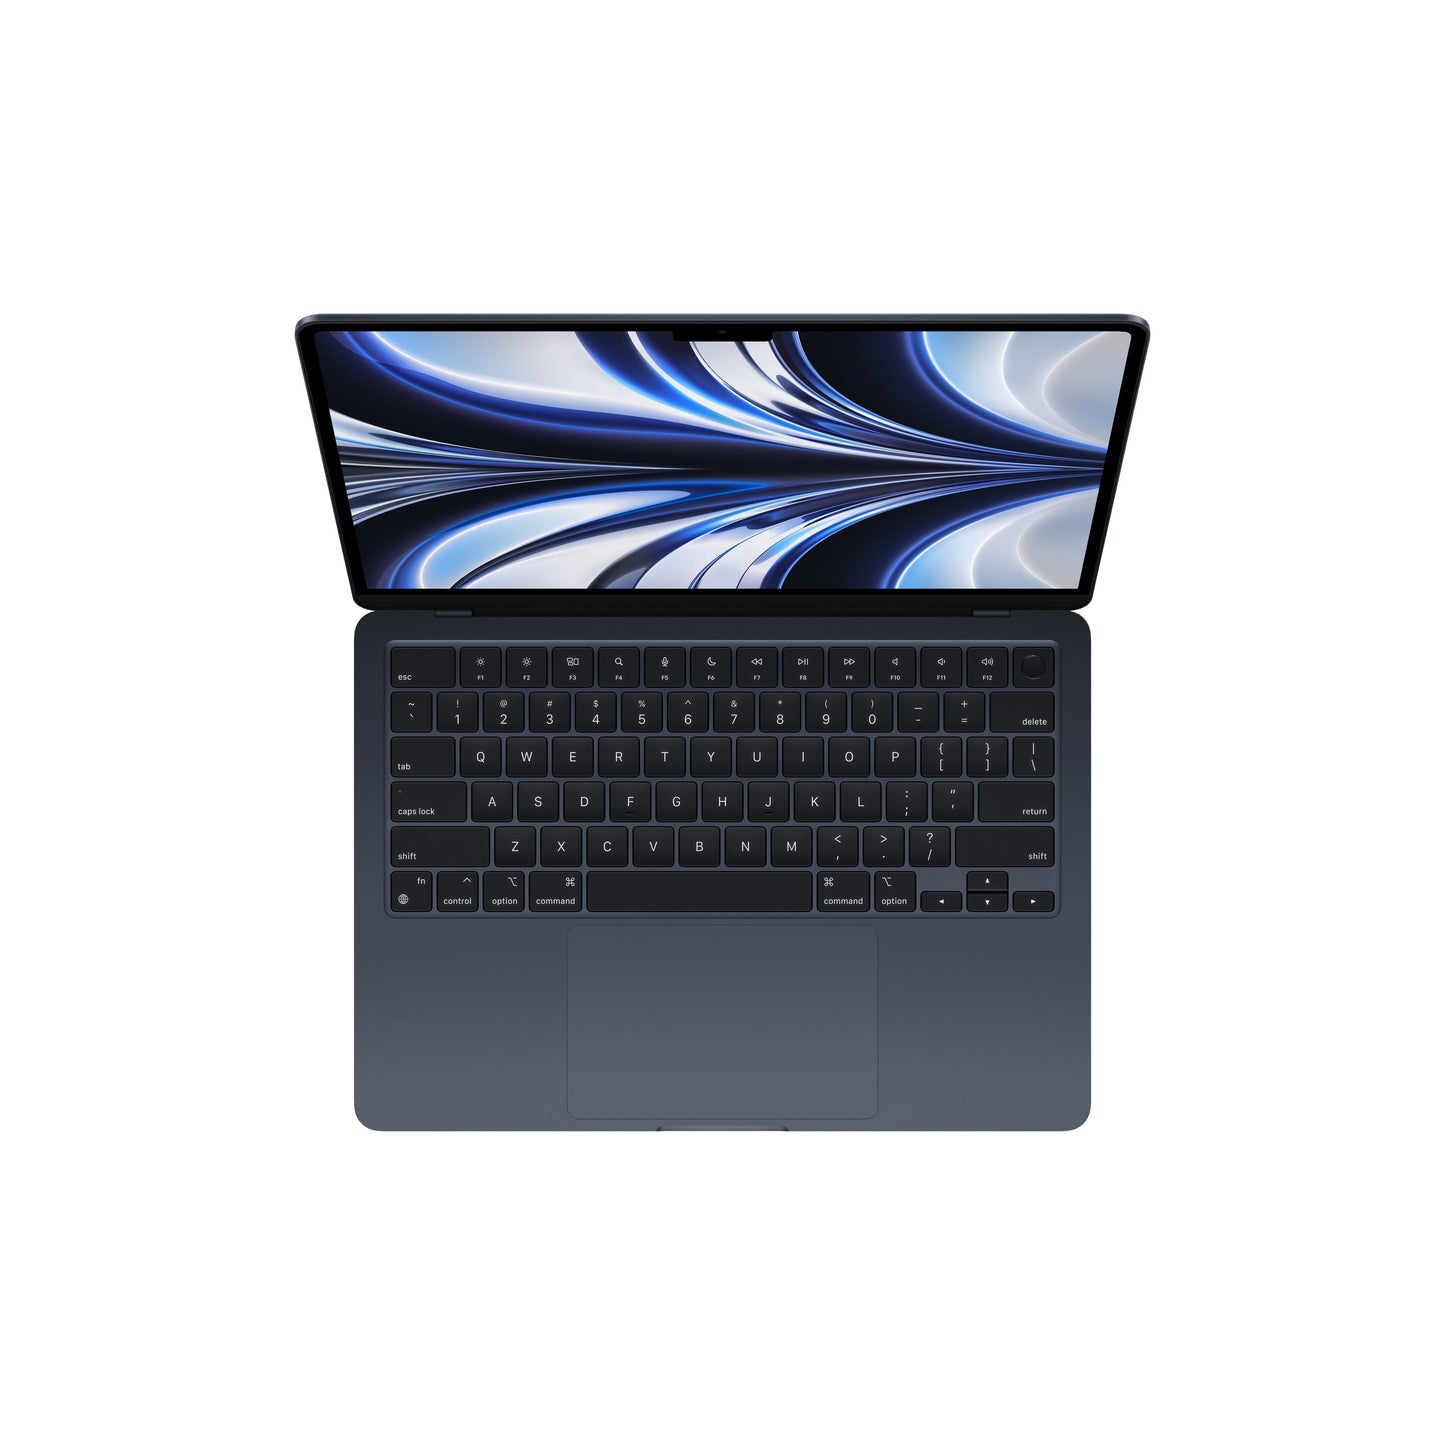 13-inch MacBook Air: Apple M2 chip with 8‑core CPU and 10‑core GPU, 512GB SSD - Midnight